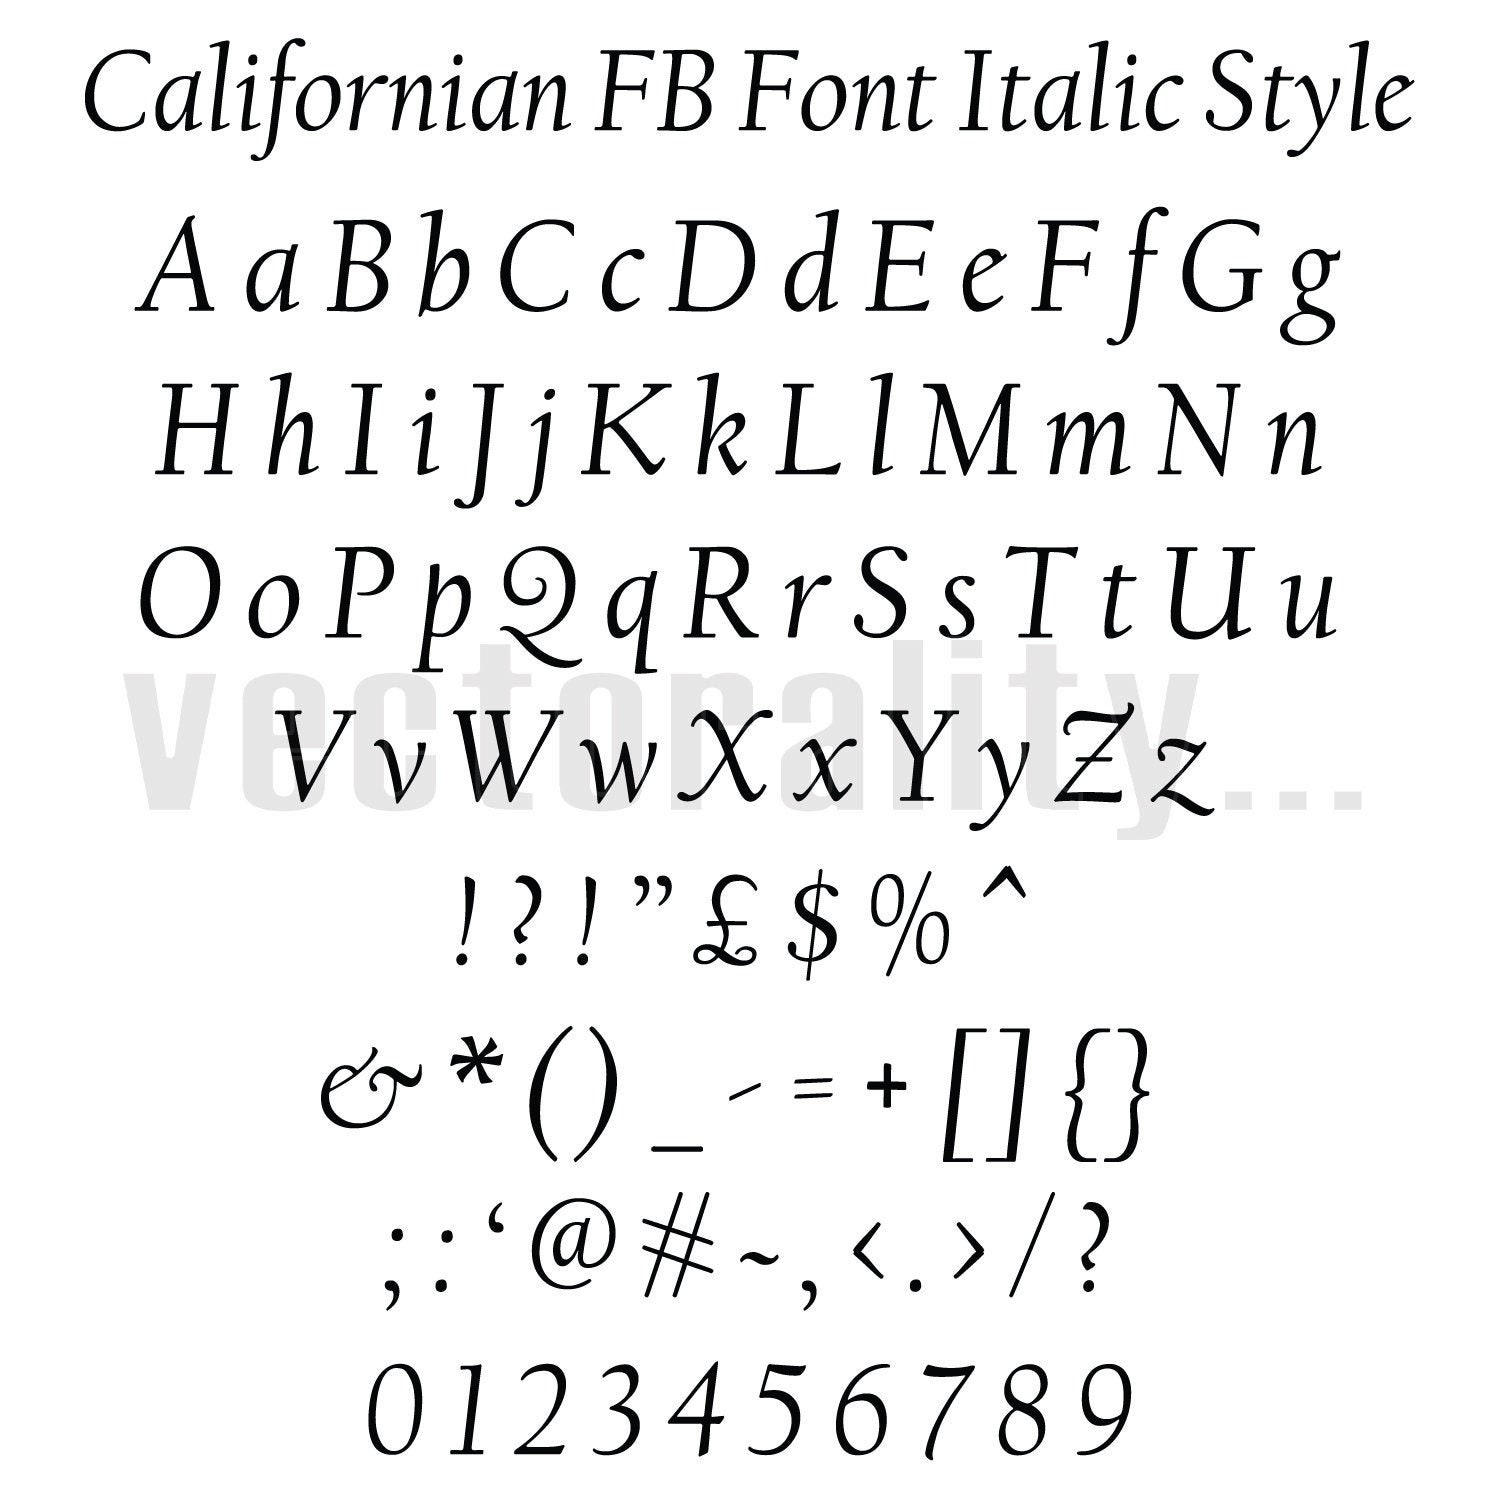 Californian Font Bold Style Alphabet Numbers Letters Vector Art File Instant Download Ai  eps  svg  pdf  dxf  png  jpg Design Cut